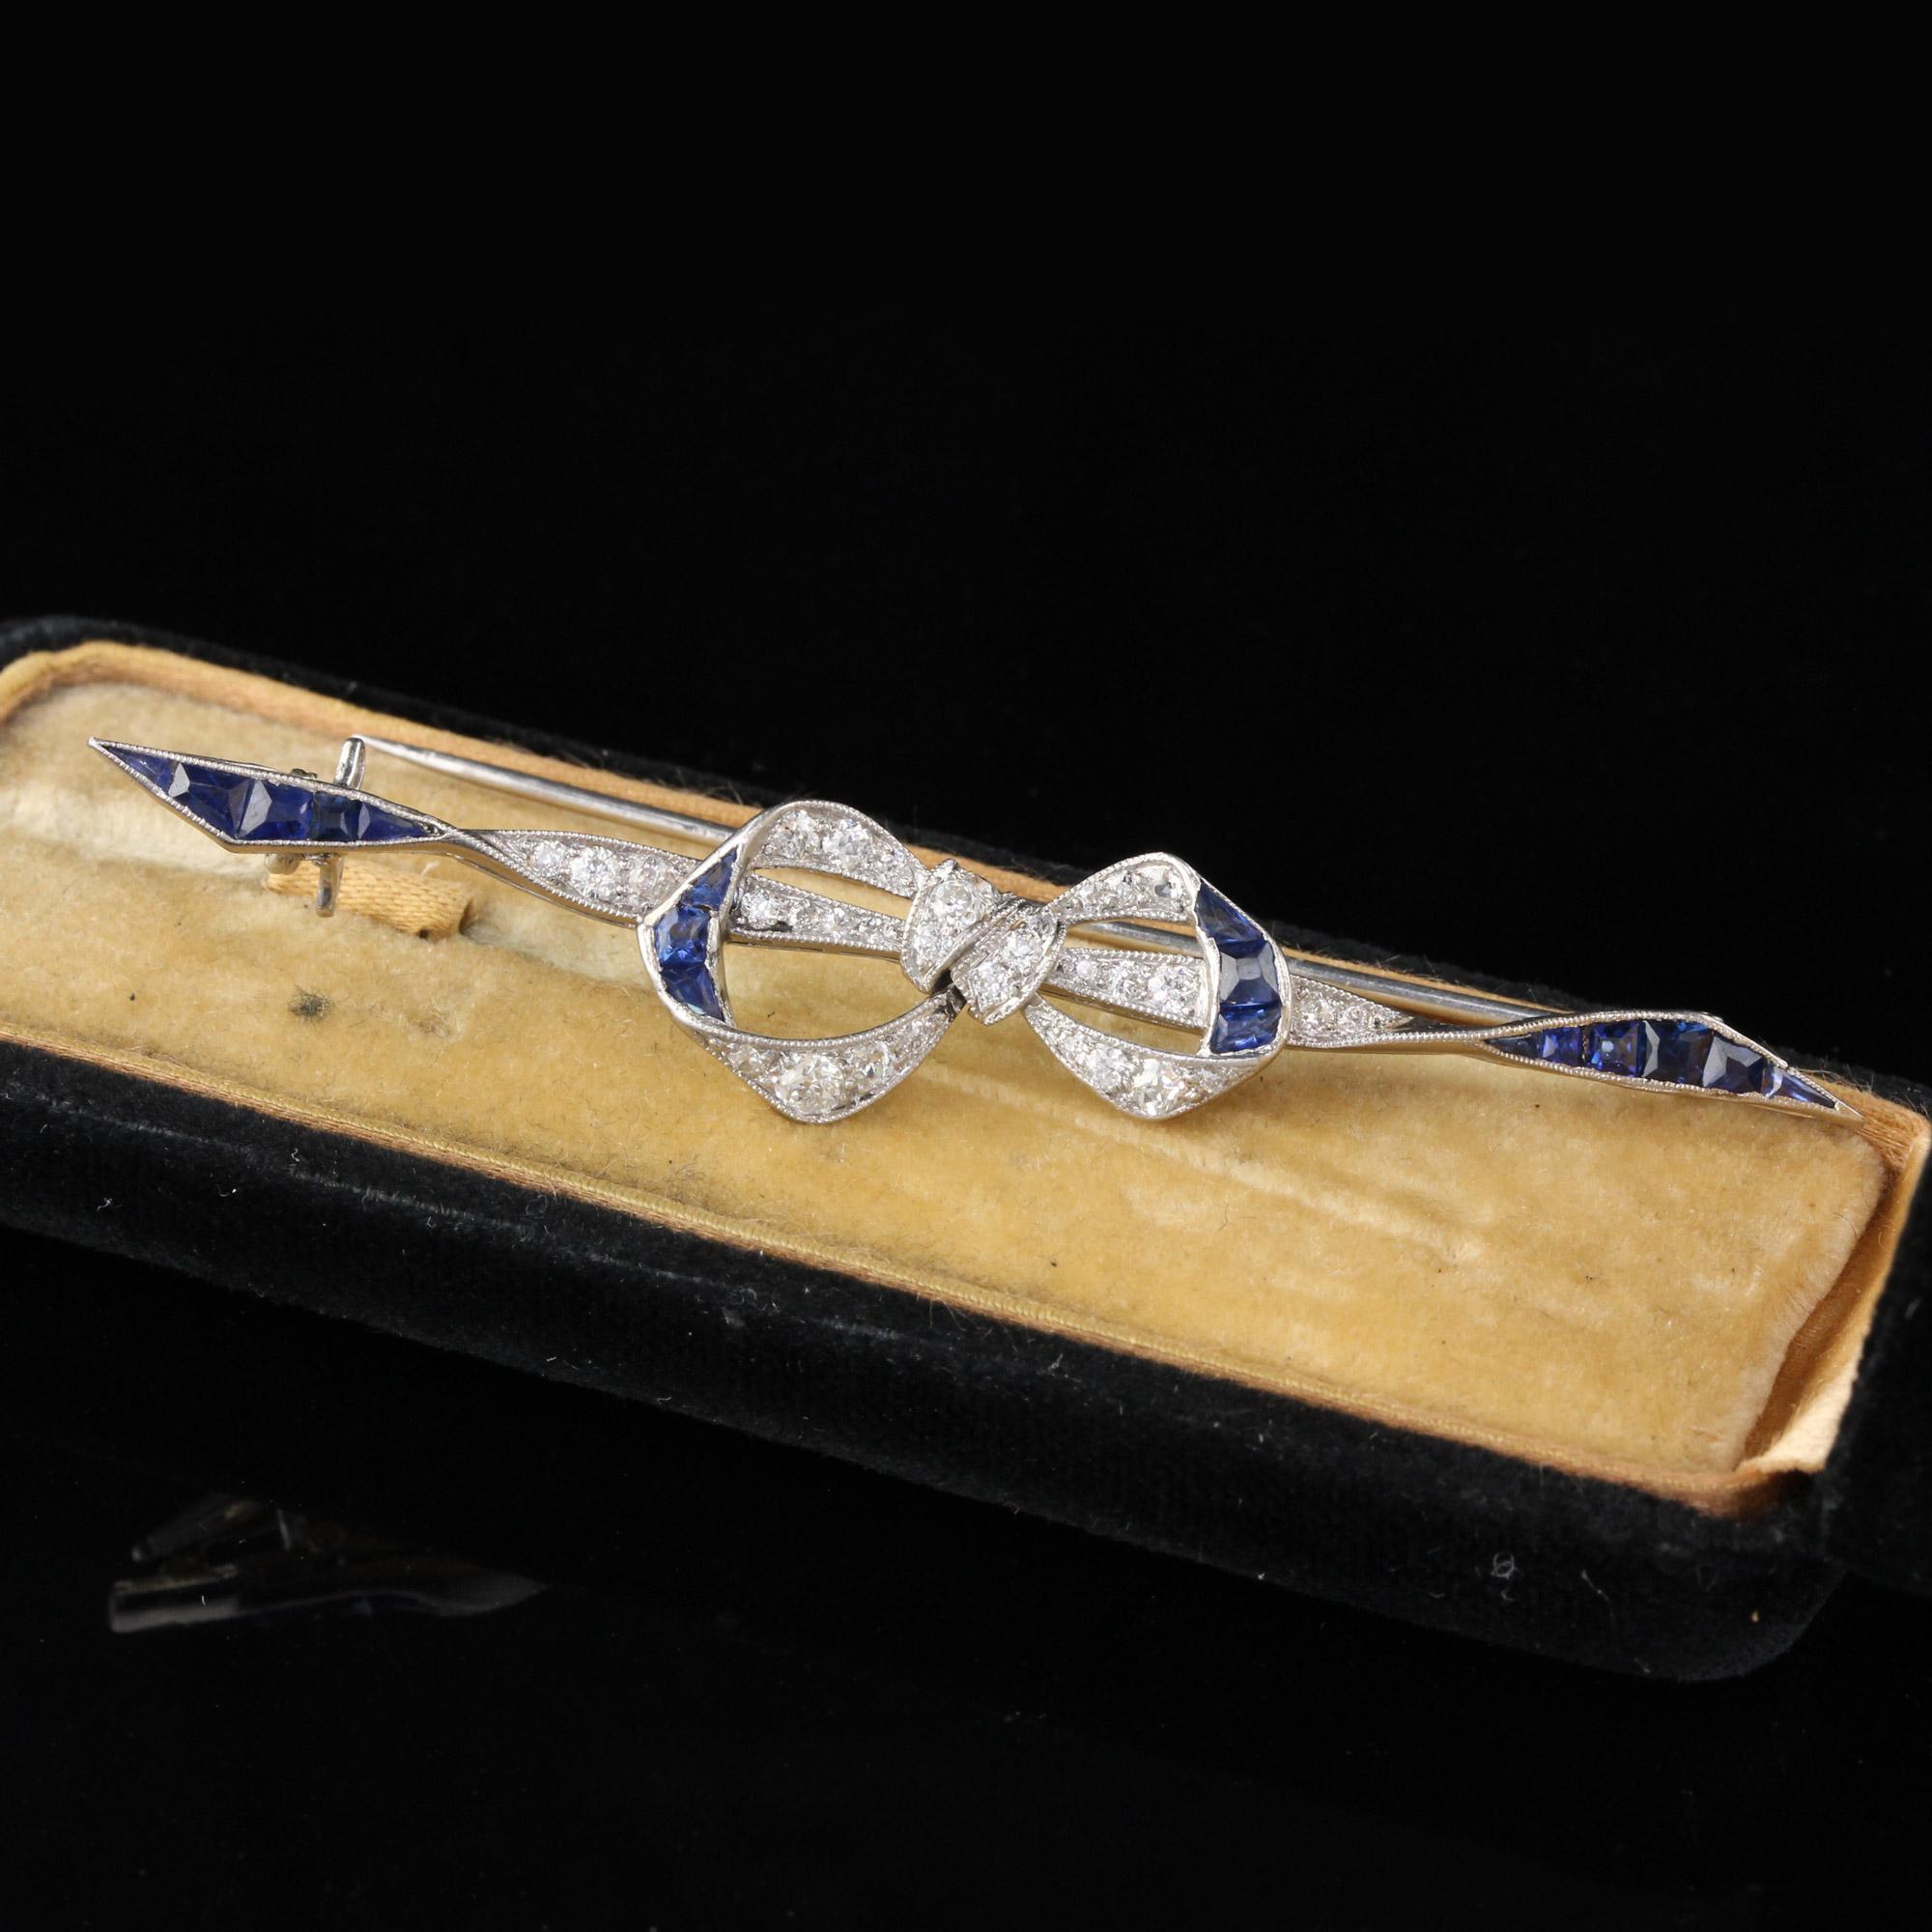 Stunning, bow-shaped diamond and sapphire pin.

Metal: Platinum (Tested by Kee tester which can test metal purity of all metals without scratching the item) 

Weight: 8.1 Grams

Diamond Weight: Approximately 0.50 ct

Diamond Color: H

Diamond